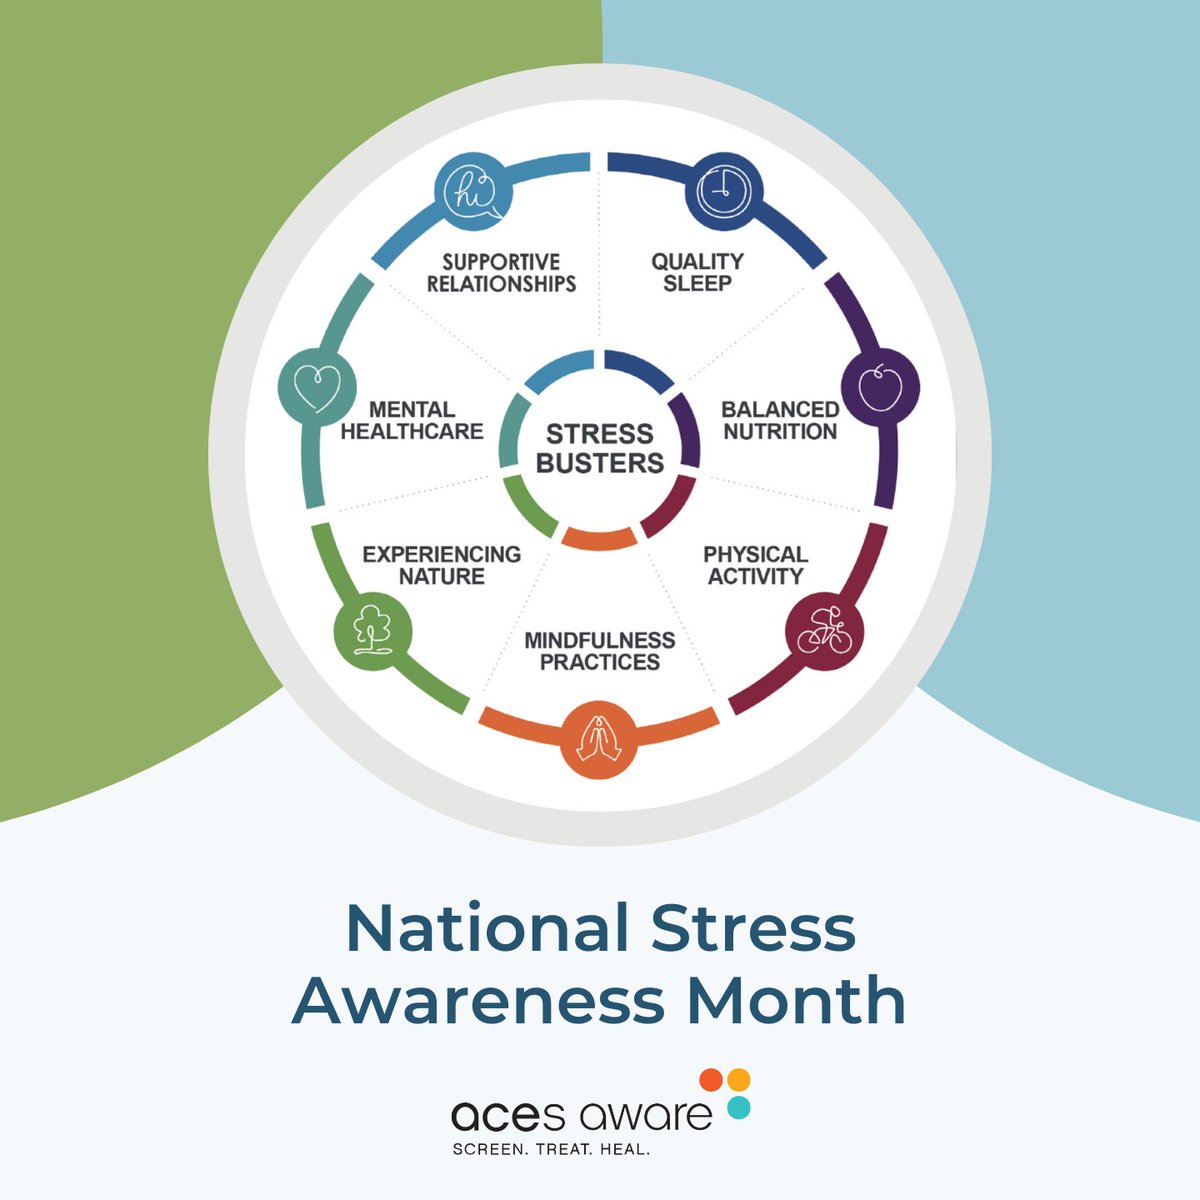 For #NationalStressAwarenessMonth, we are drawing attention to evidence-based strategies for managing stress, also known as Stress Busters. Stress Busters have been shown to improve brain health and immune function and balance stress hormones. Learn more: bit.ly/3TVvB6P